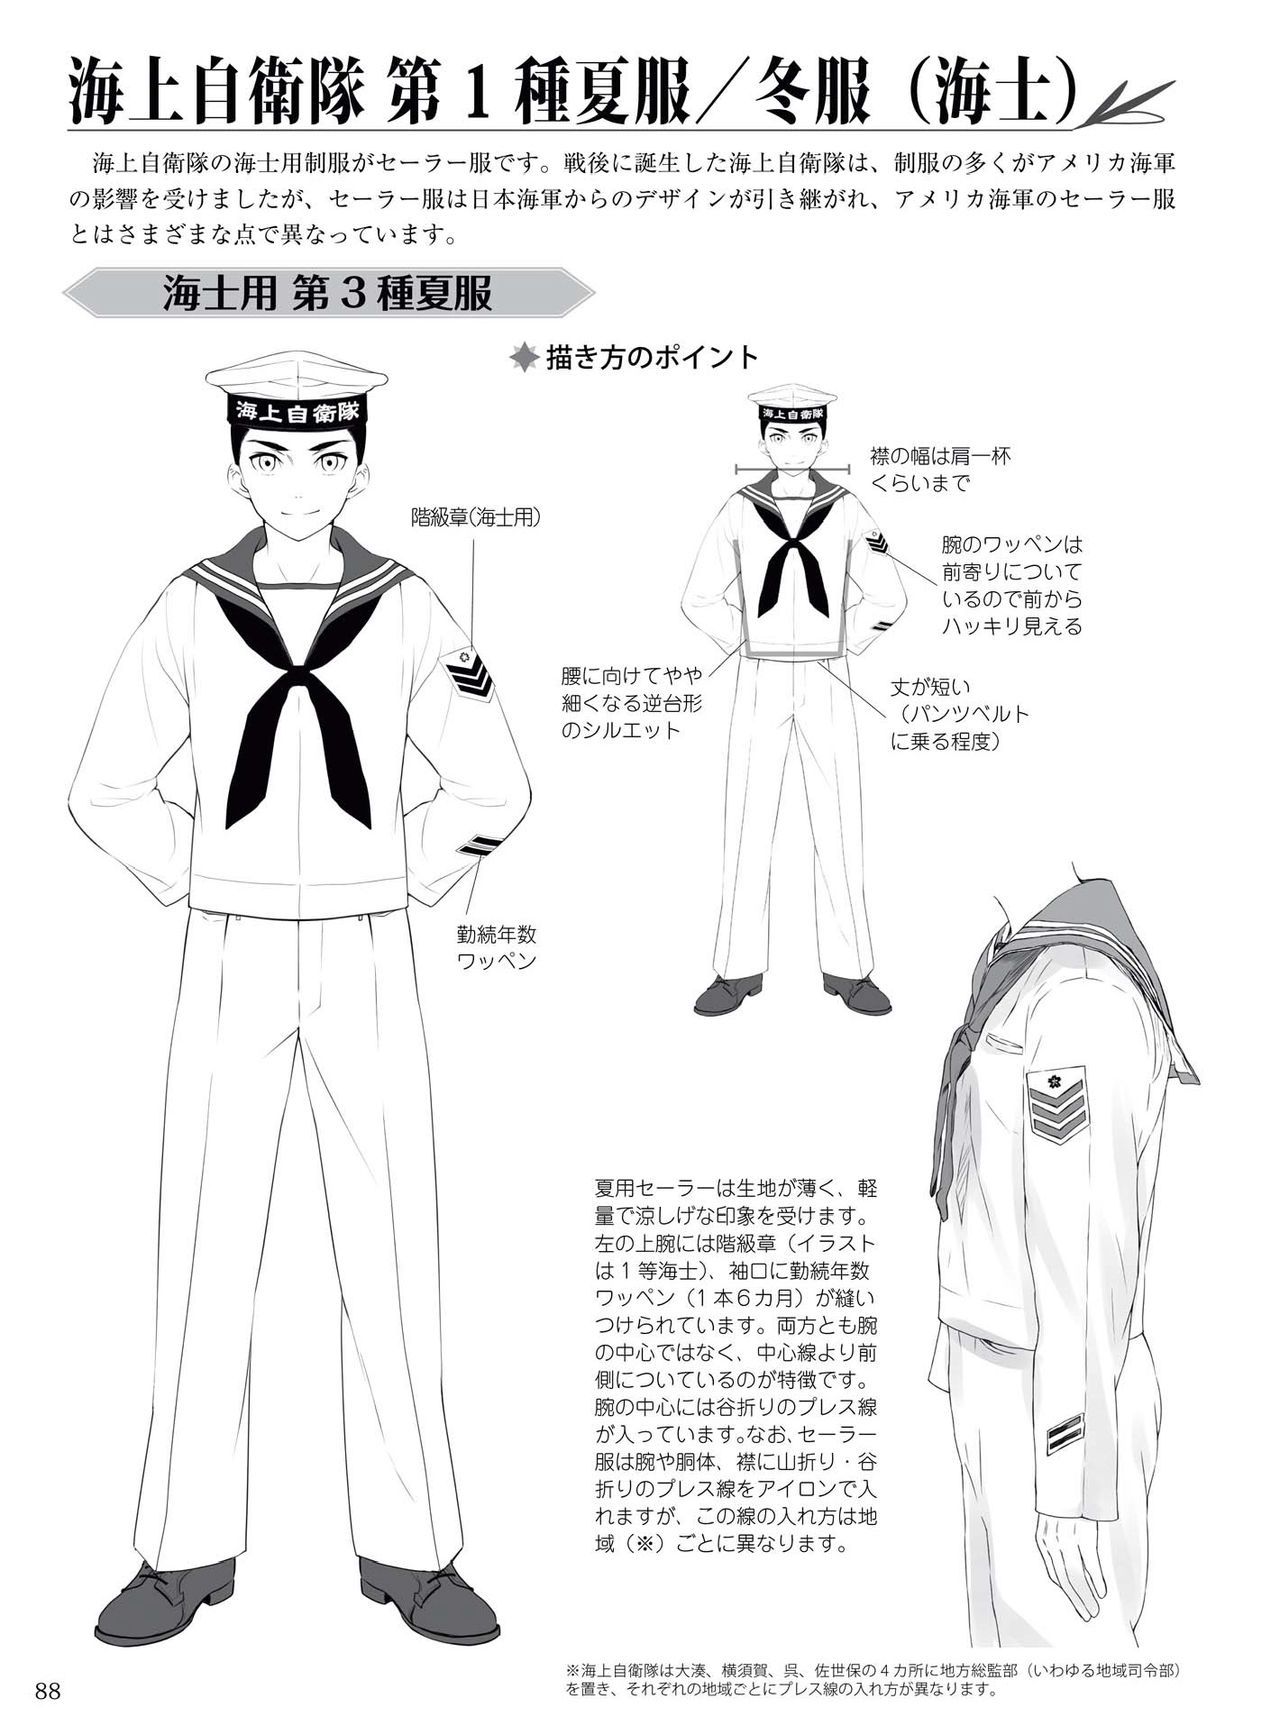 How to draw military uniforms and uniforms From Self-Defense Forces 軍服・制服の描き方 アメリカ軍・自衛隊の制服から戦闘服まで 91